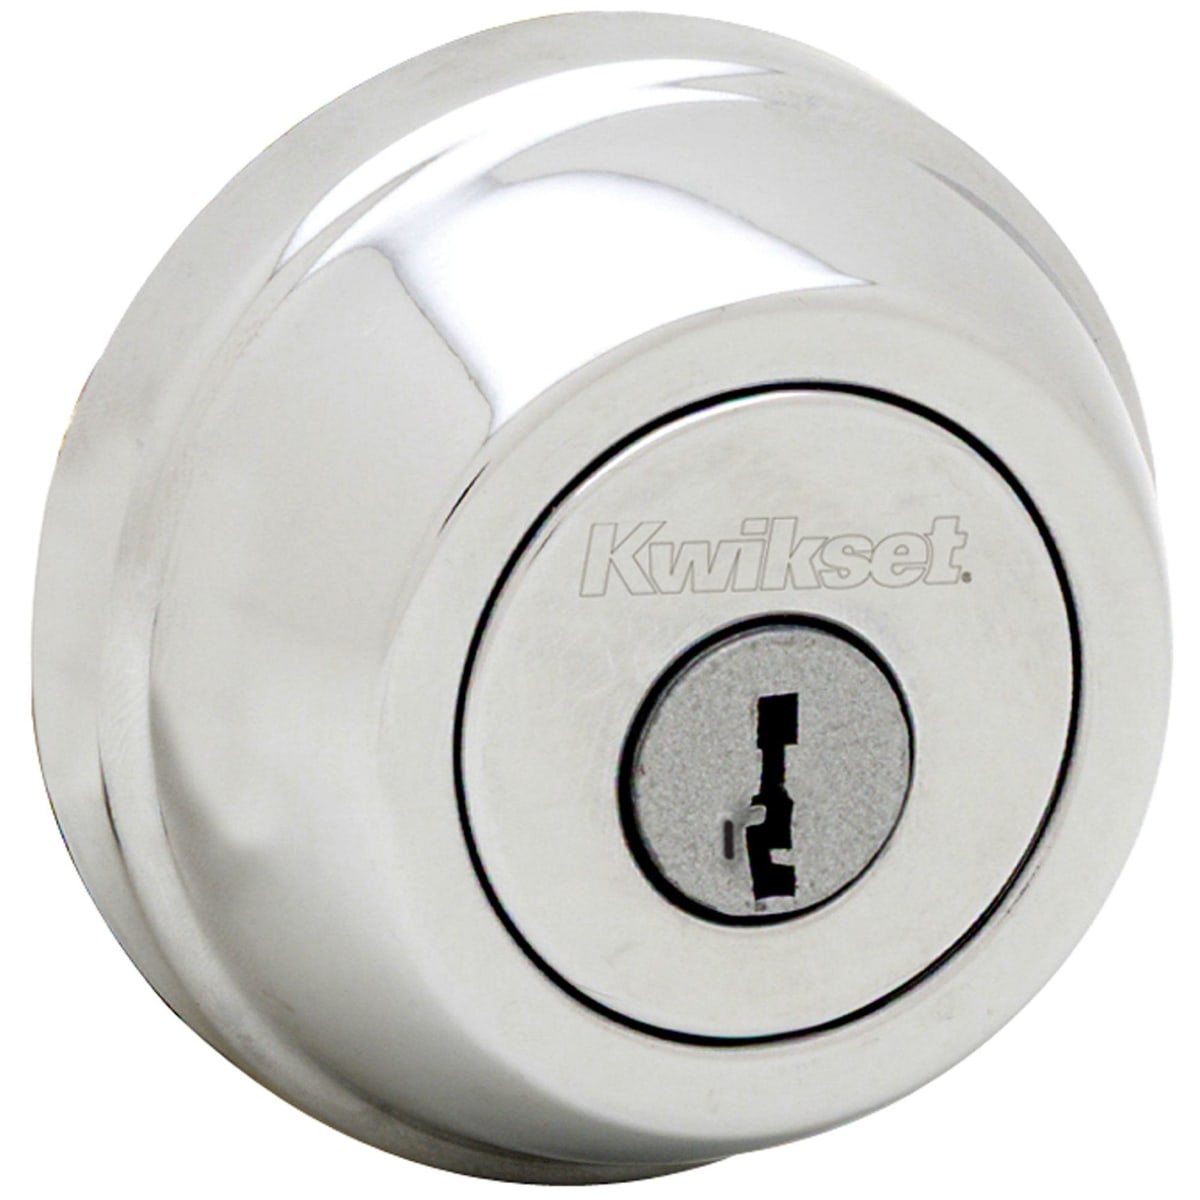 Kwikset 780-26SV1 Polished Chrome Single Cylinder Deadbolt with SmartKey  from the 780 Series